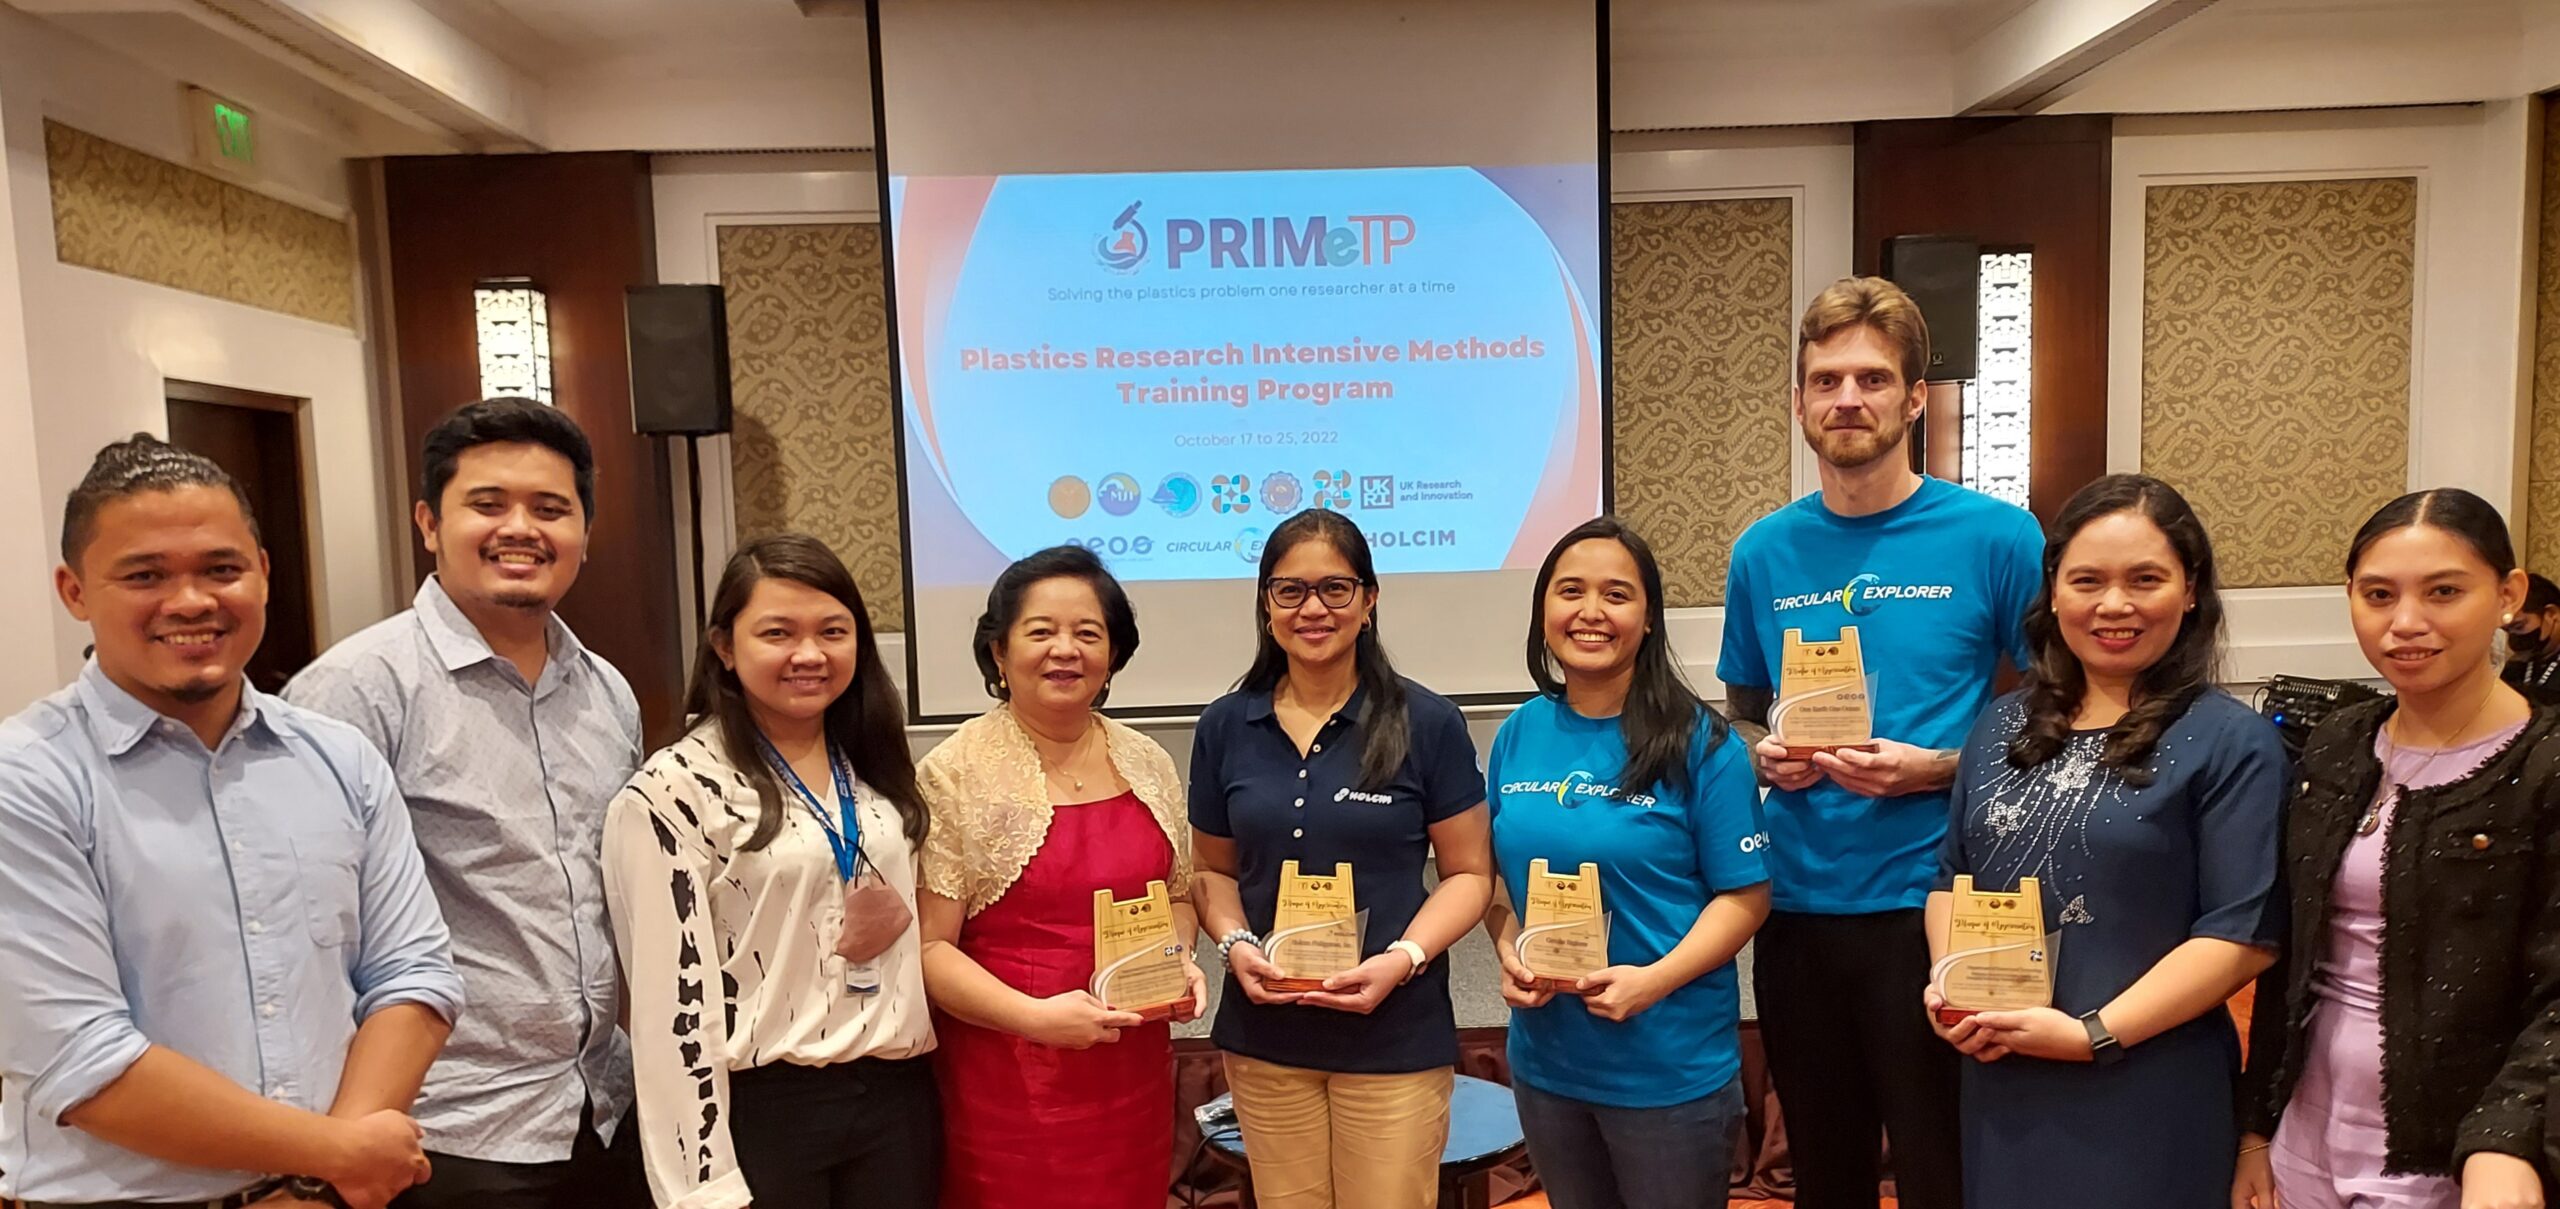 Holcim, Circular Explorer boosts marine plastic pollution research in the Philippines 